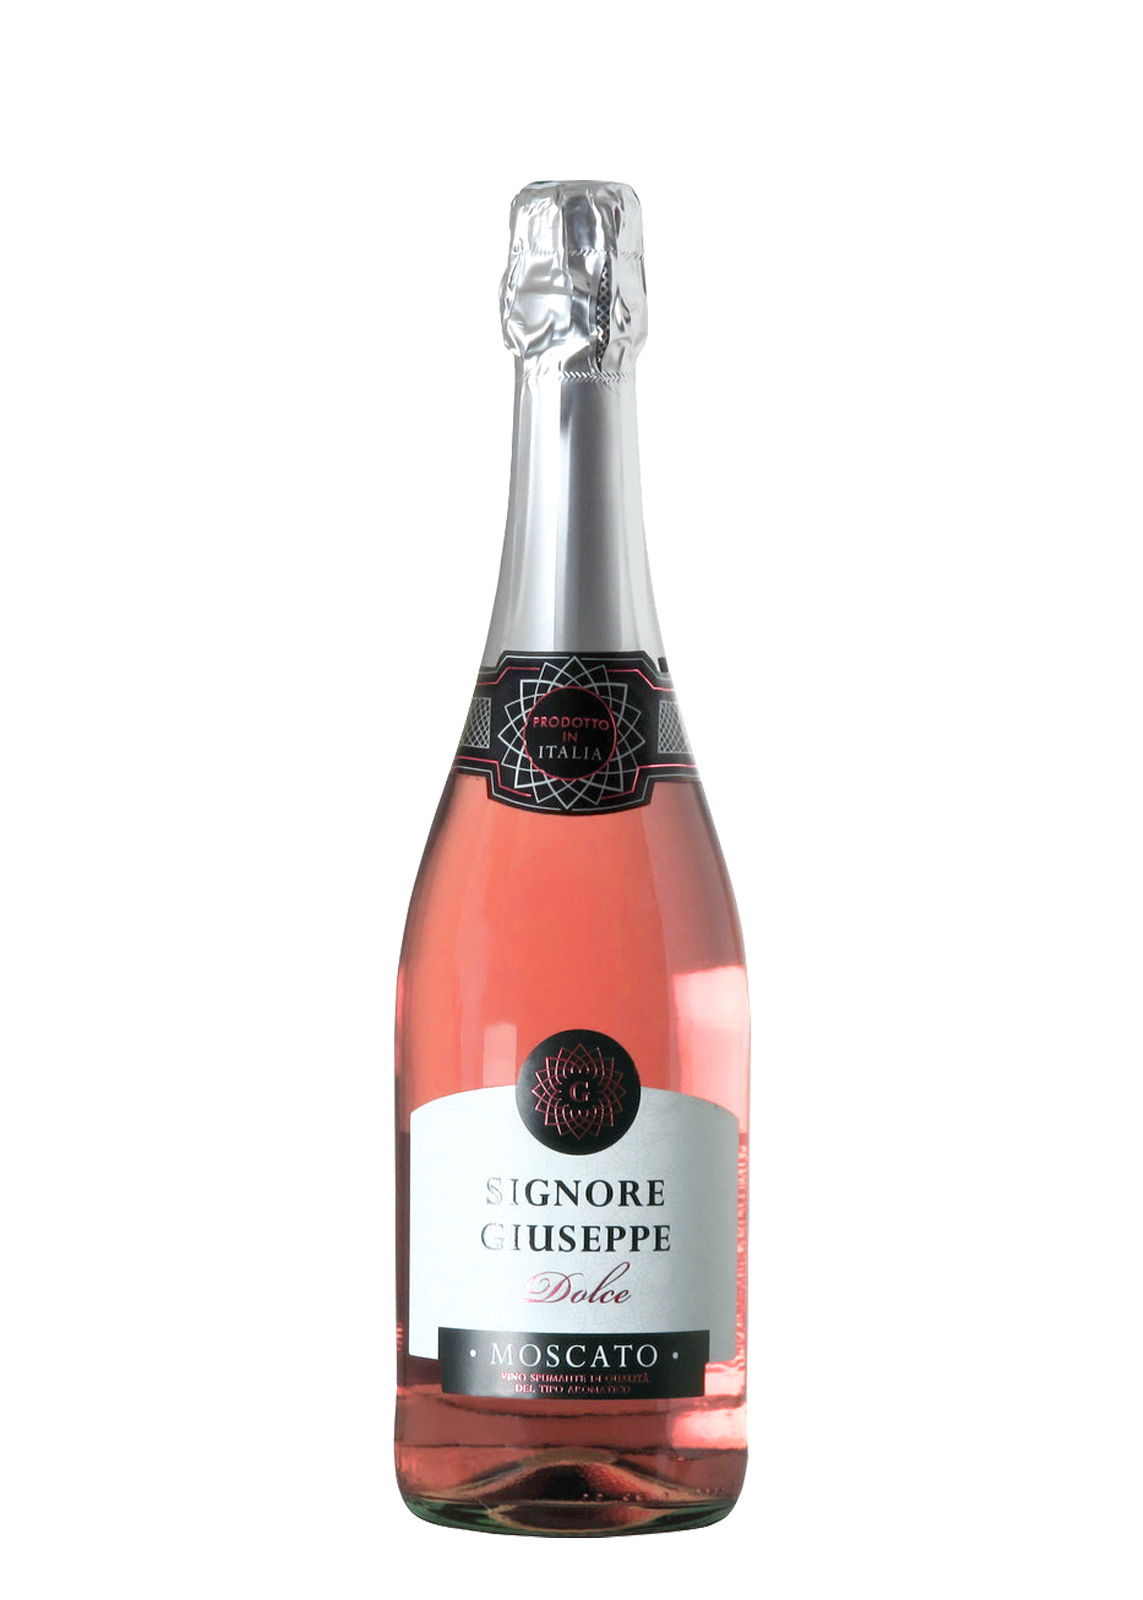 Moscato dolce. Moscato Rose Dolce 0,75. Шампанское Moscato Rose. Signore Giuseppe Moscato шампанское. Moscato шампанское Rose Dolce.